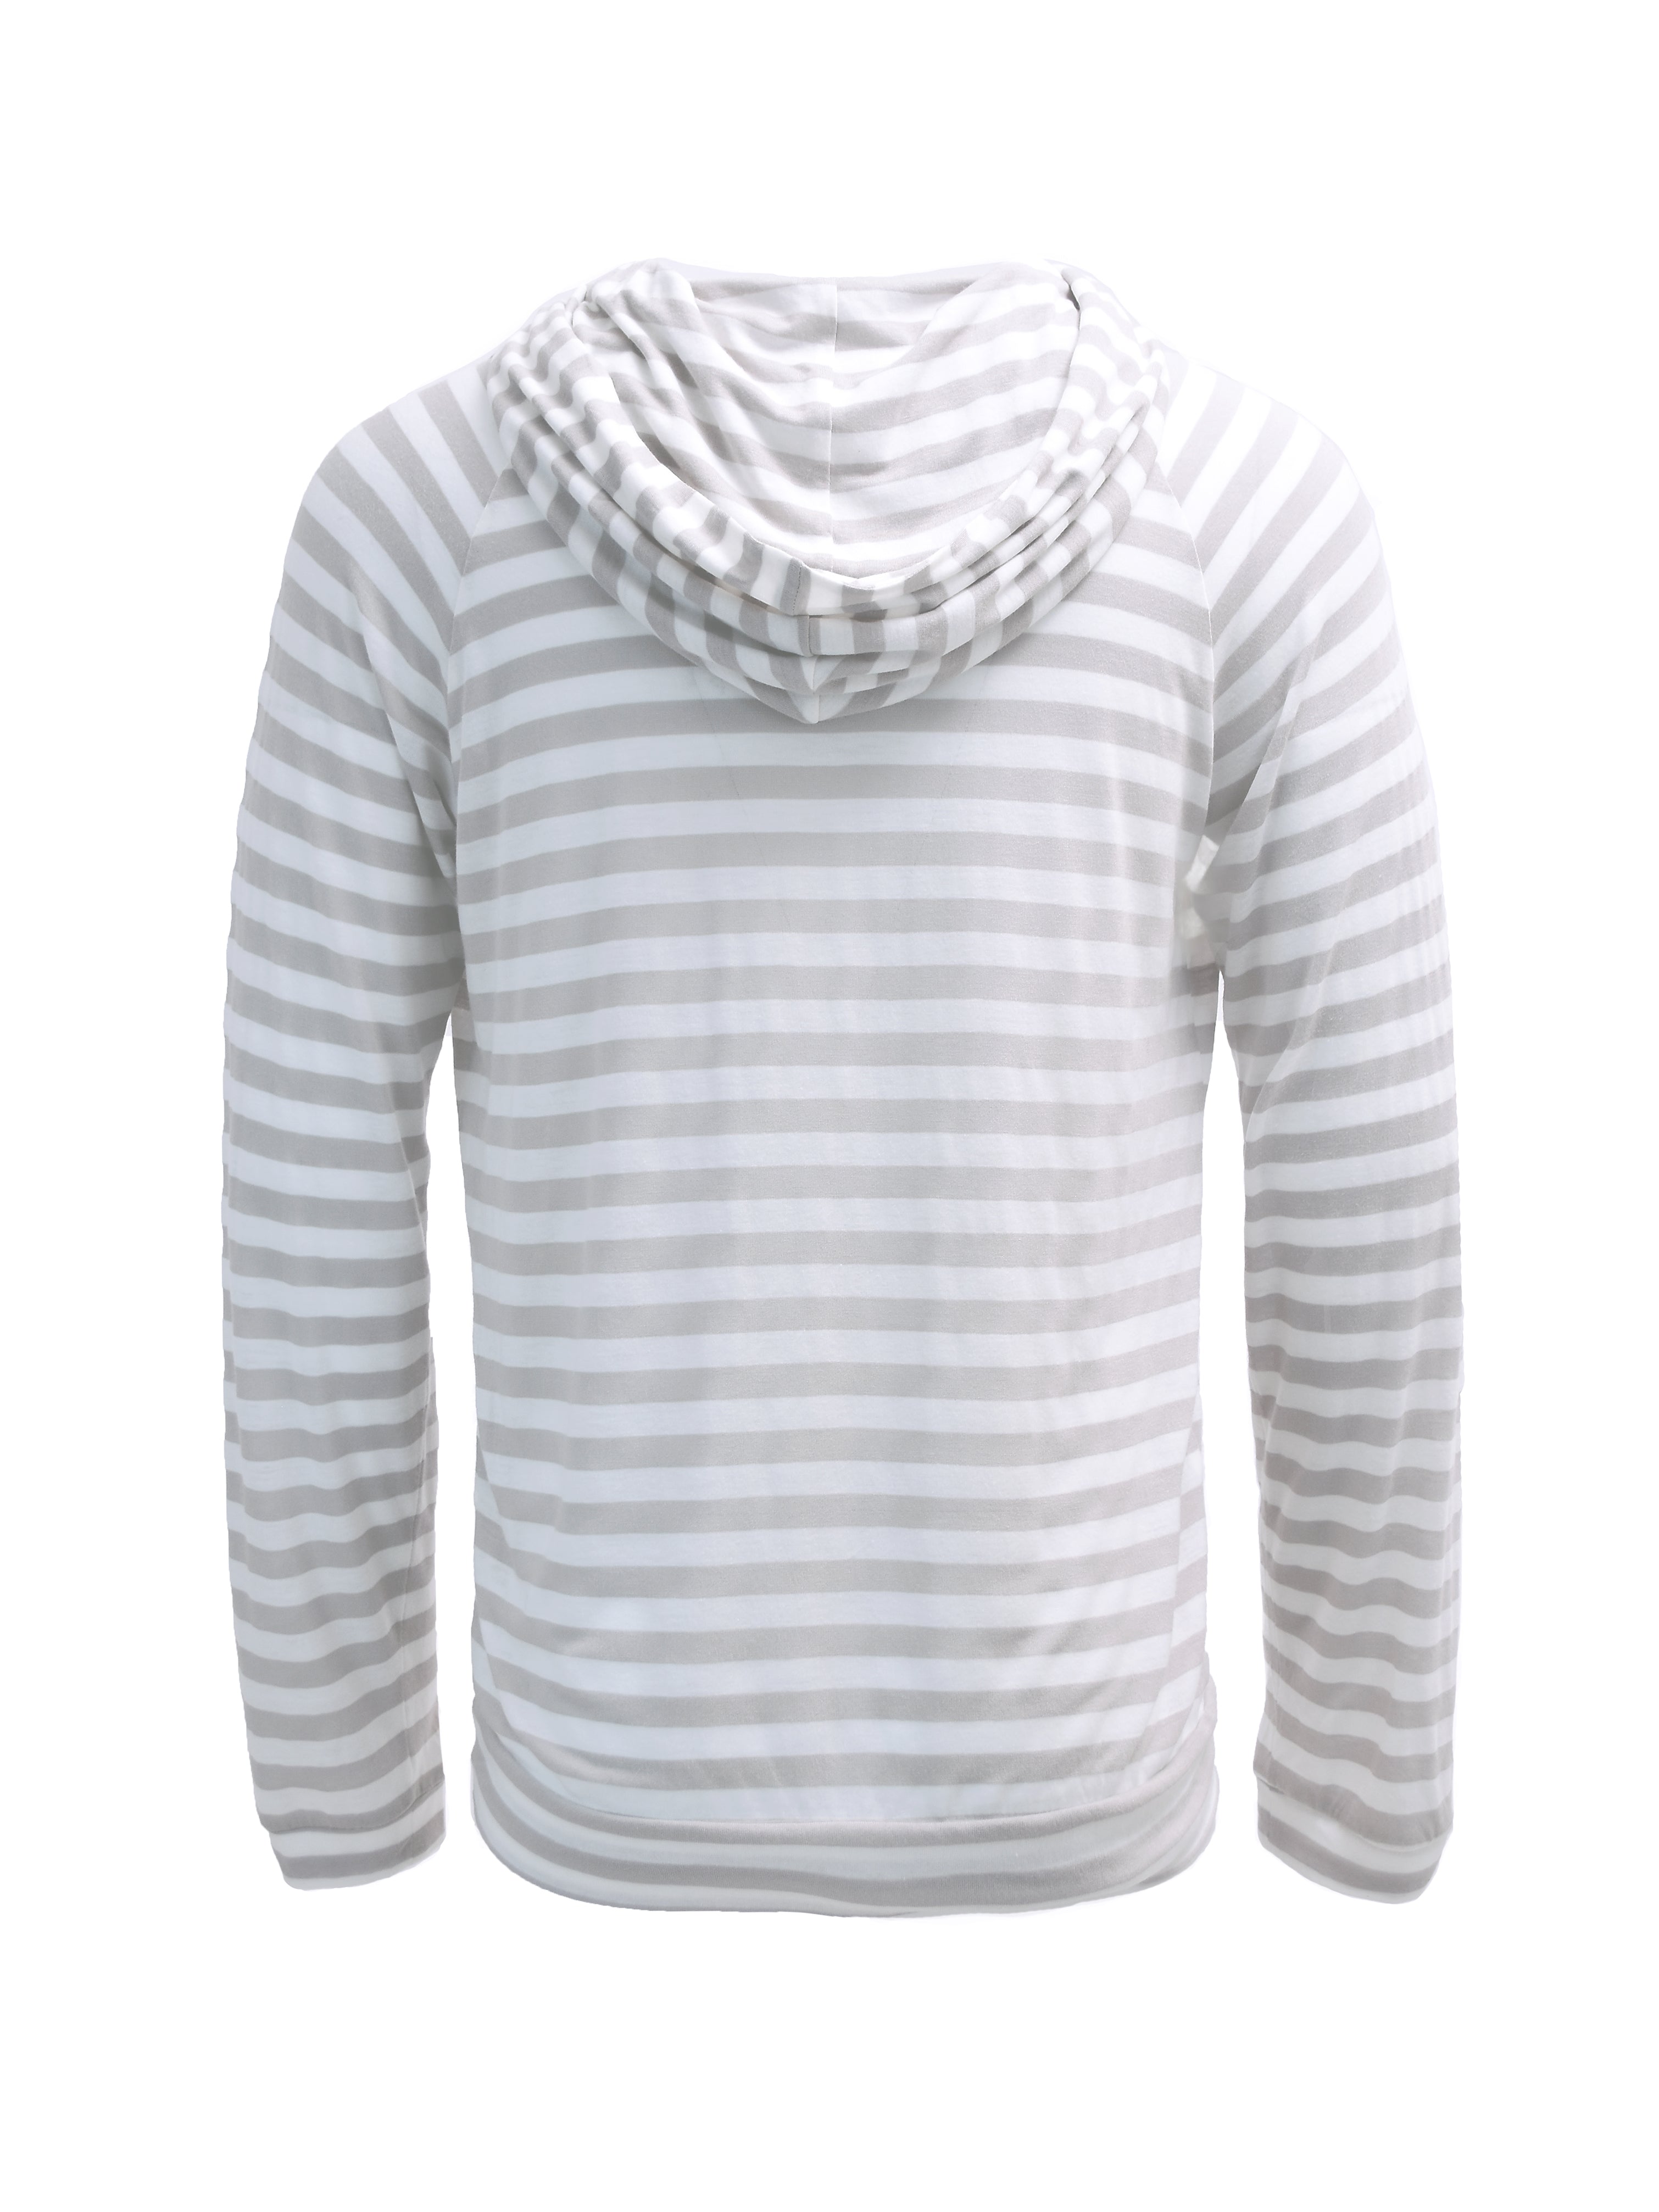 WHITE AND GREY STRIPED HOODIE TOP